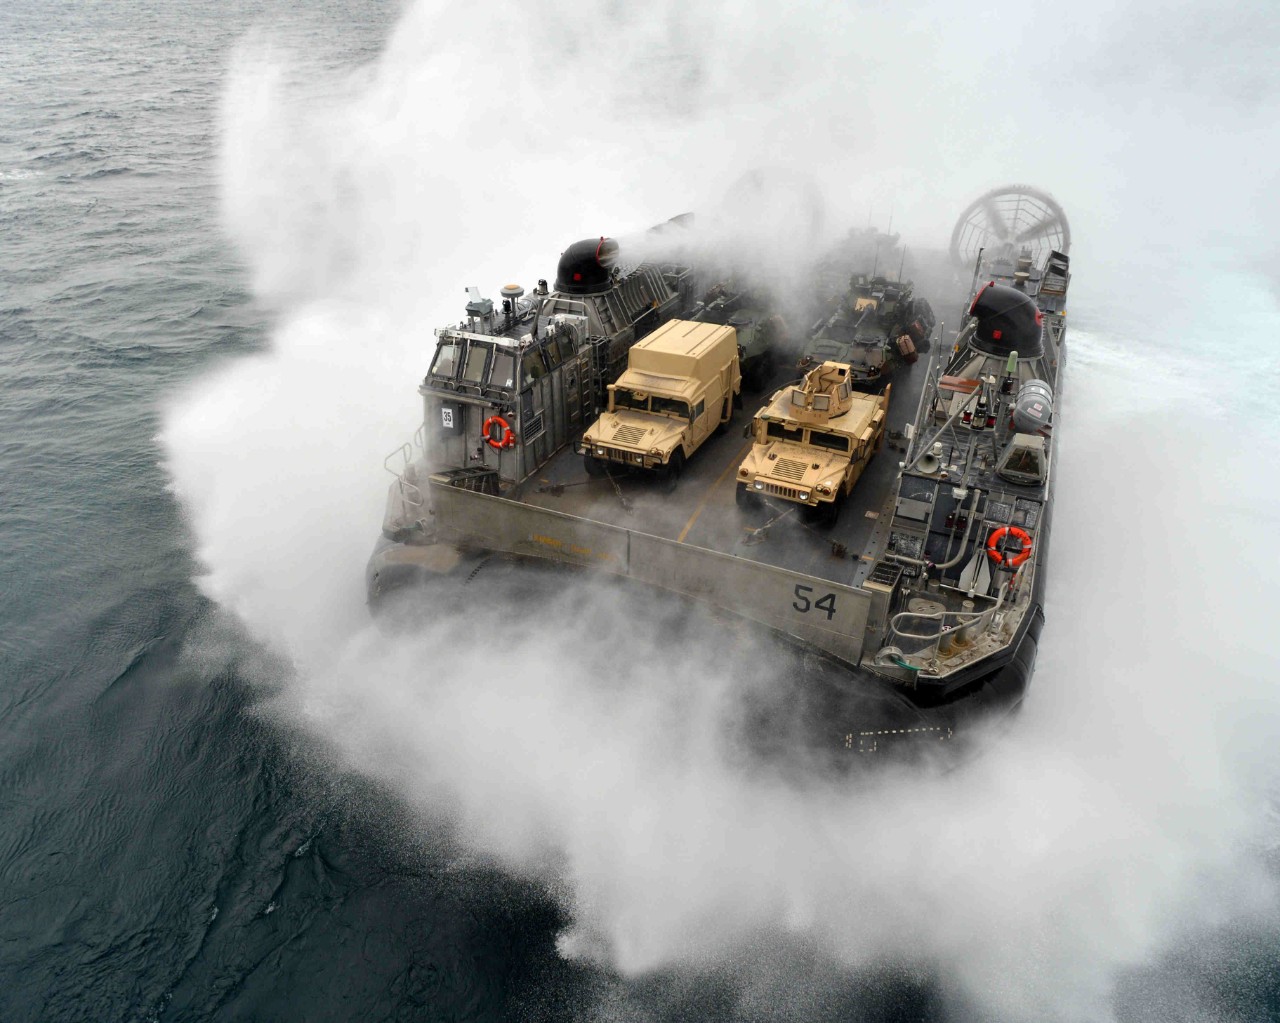 A U.S. Navy Landing Craft Air Cushion, more commonly known as an LCAC, approaches the well deck of the amphibious assault ship USS Bataan (LHD 5) in the Atlantic Ocean on Oct. 31, 2013.  The Bataan and the 22nd Marine Expeditionary Unit are underway conducting routine qualifications.  DoD photo by Petty Officer 3rd Class Erik Foster, U.S. Navy.  (Released)